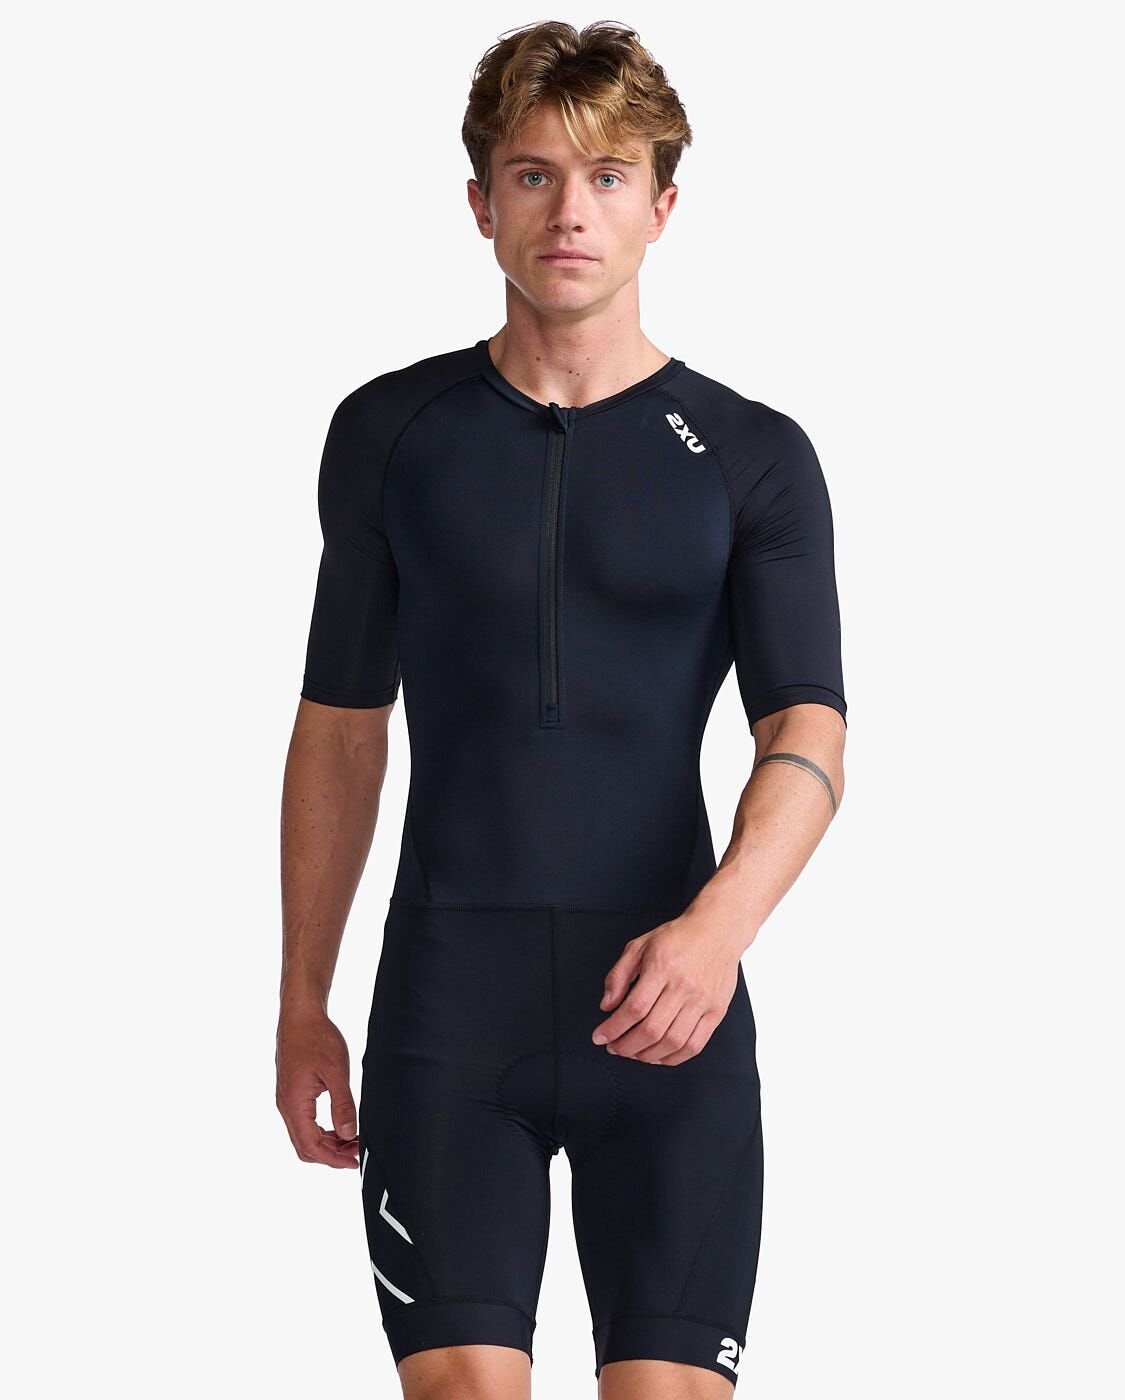 2XU South Africa - Mens Core Sleeved Trisuit - BLK/WHT